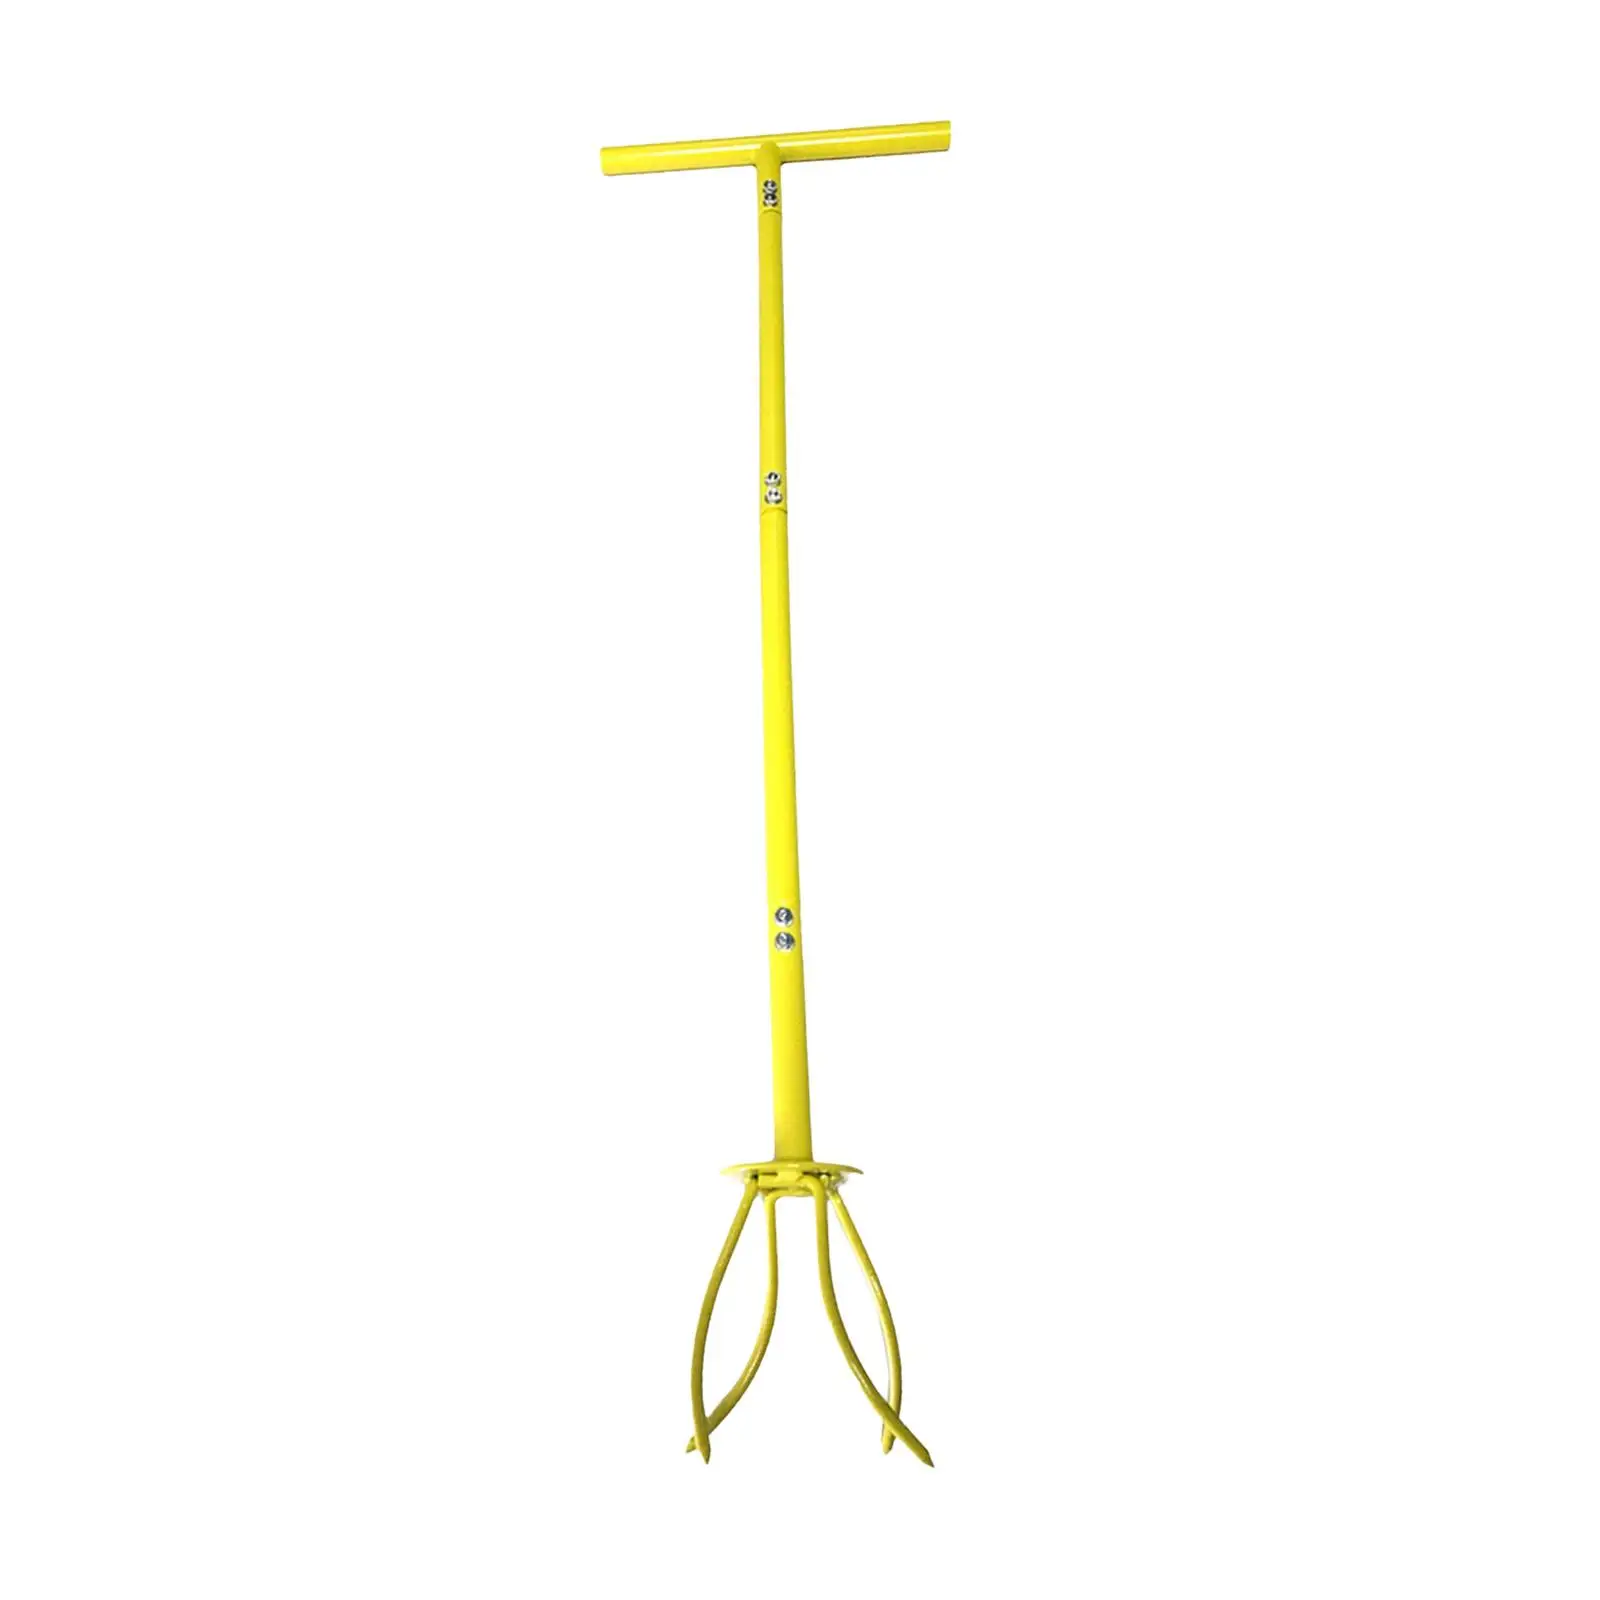 Manual Hand Tiller Heavy Duty No Bending for Narrow and Wide Areas Detachable with Adjustable Shaft Gardening Hand Twist Tiller